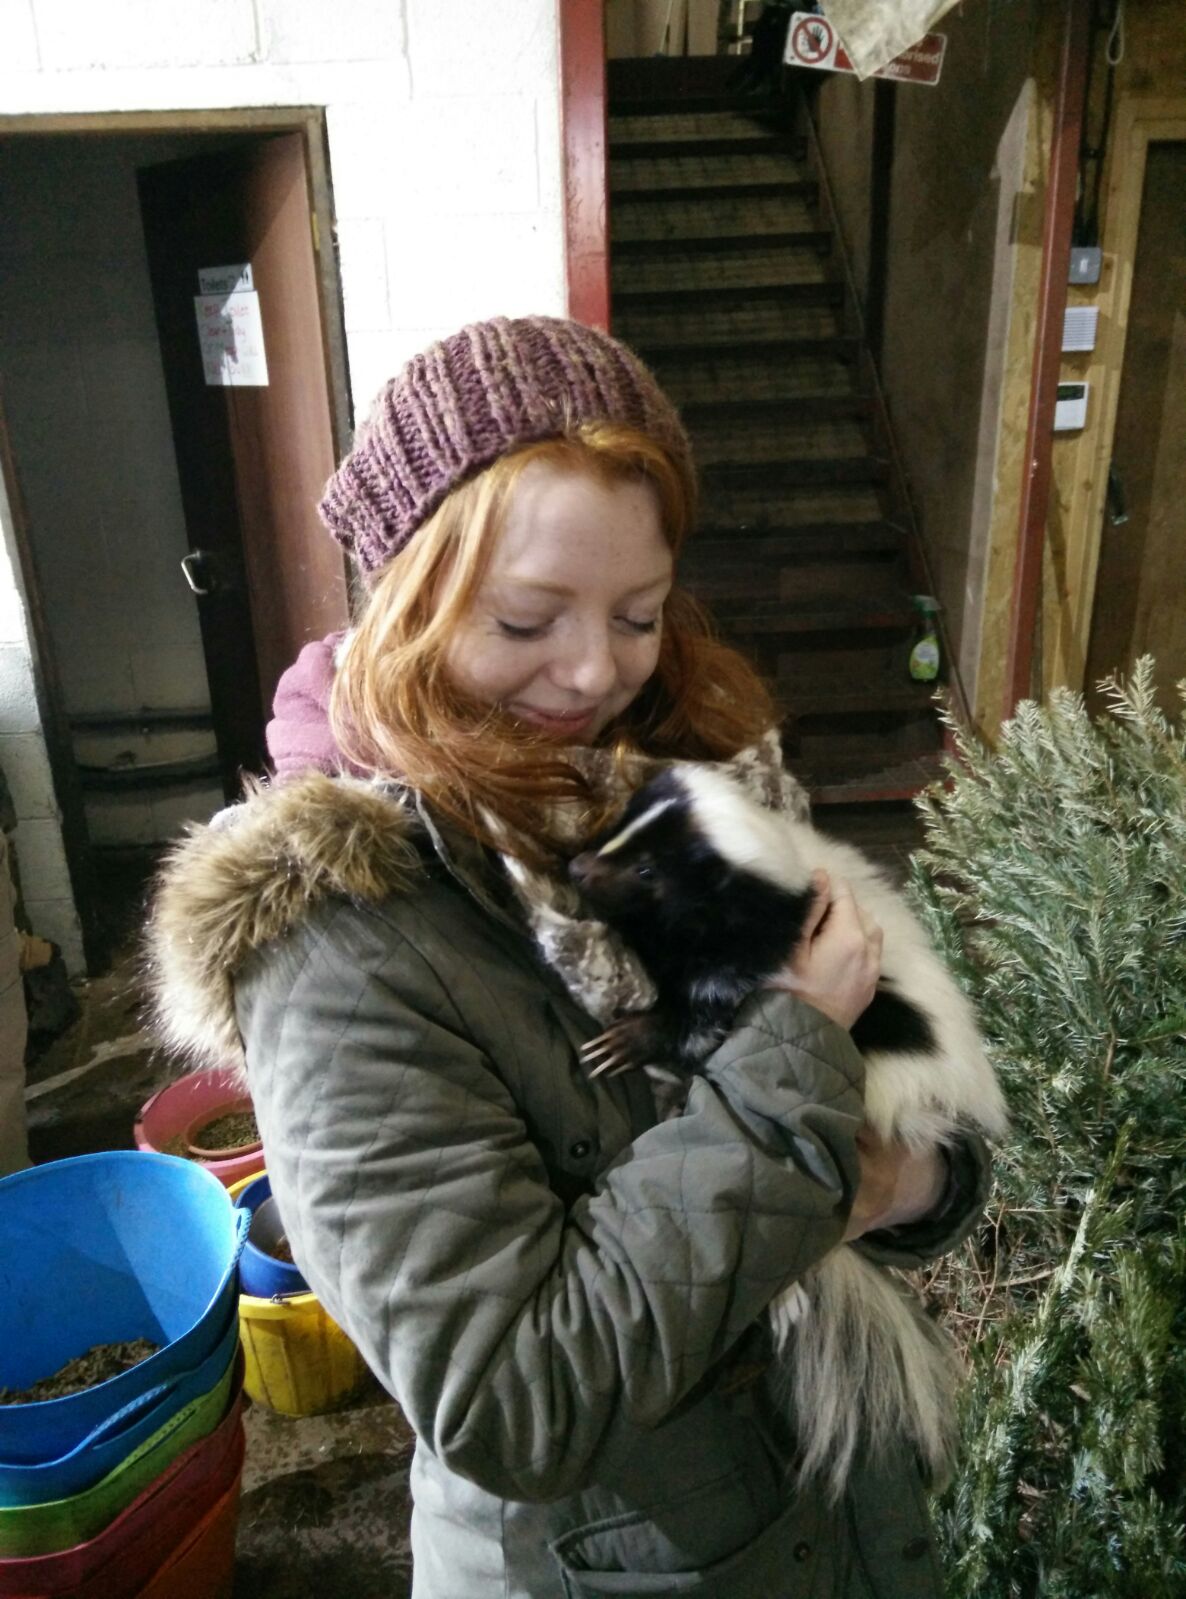 Sian with Skunk